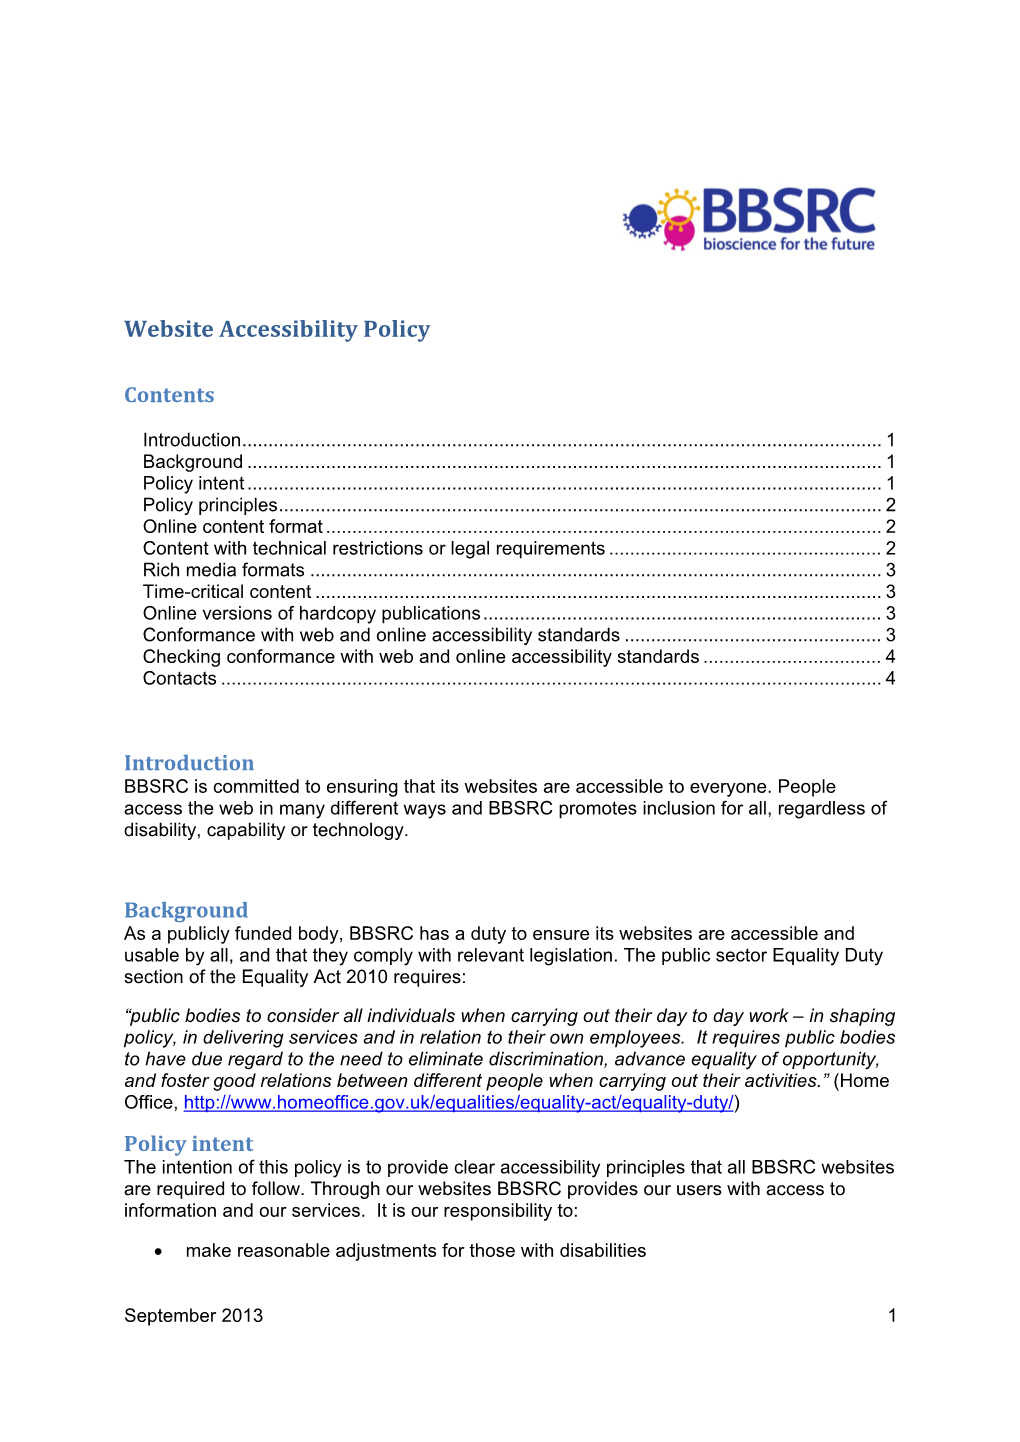 BBSRC Accessibility Policy, Please Contact